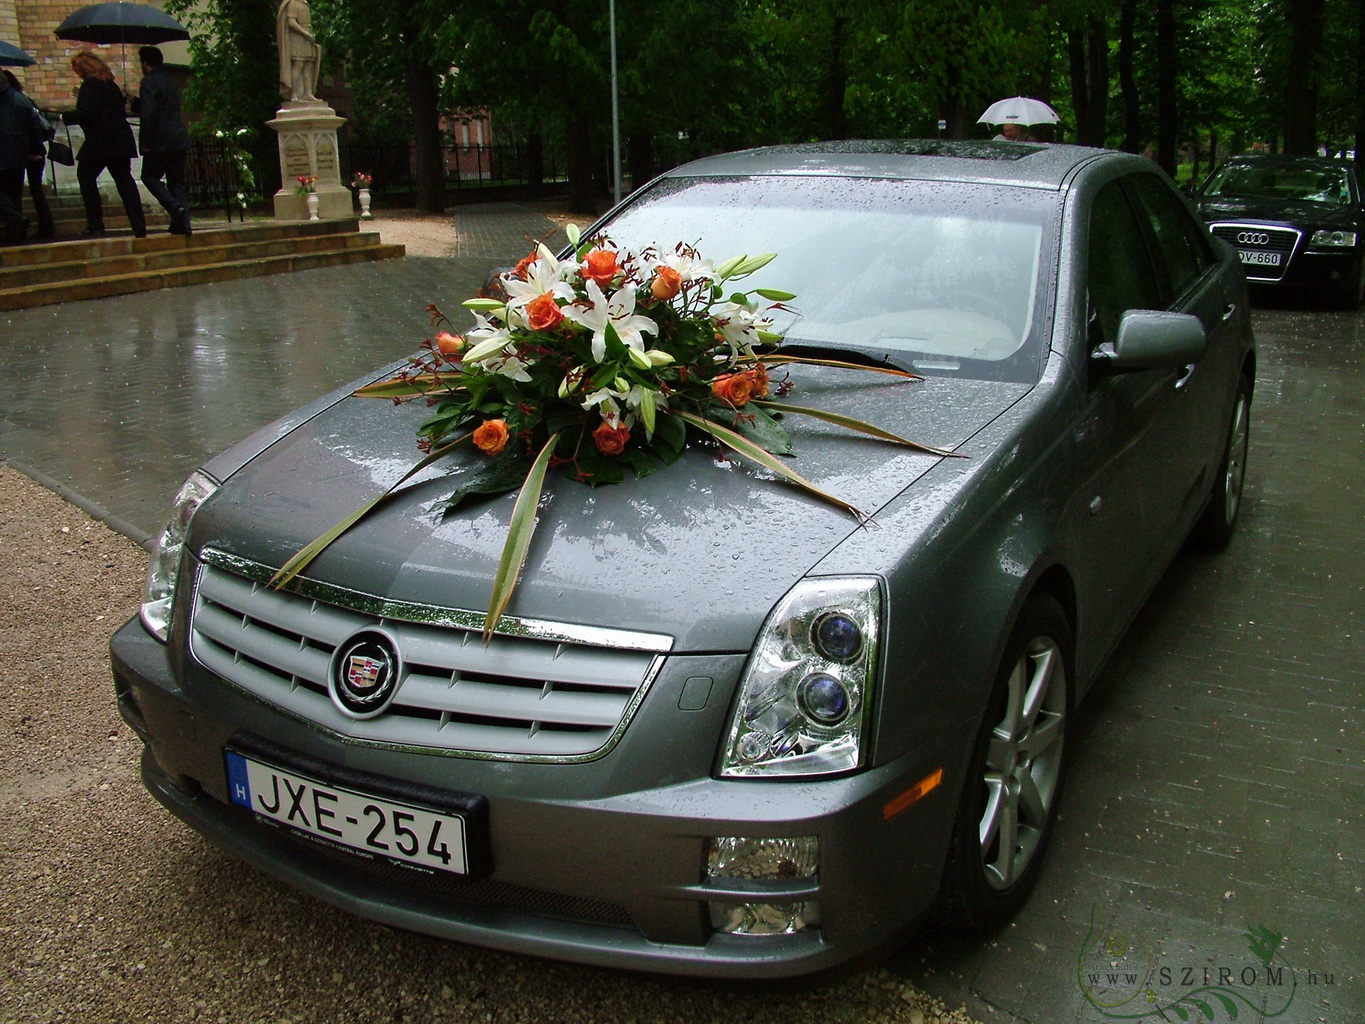 flower delivery Budapest - round car flower arrangement with roses and cangaroo paws (lily, orange, white)